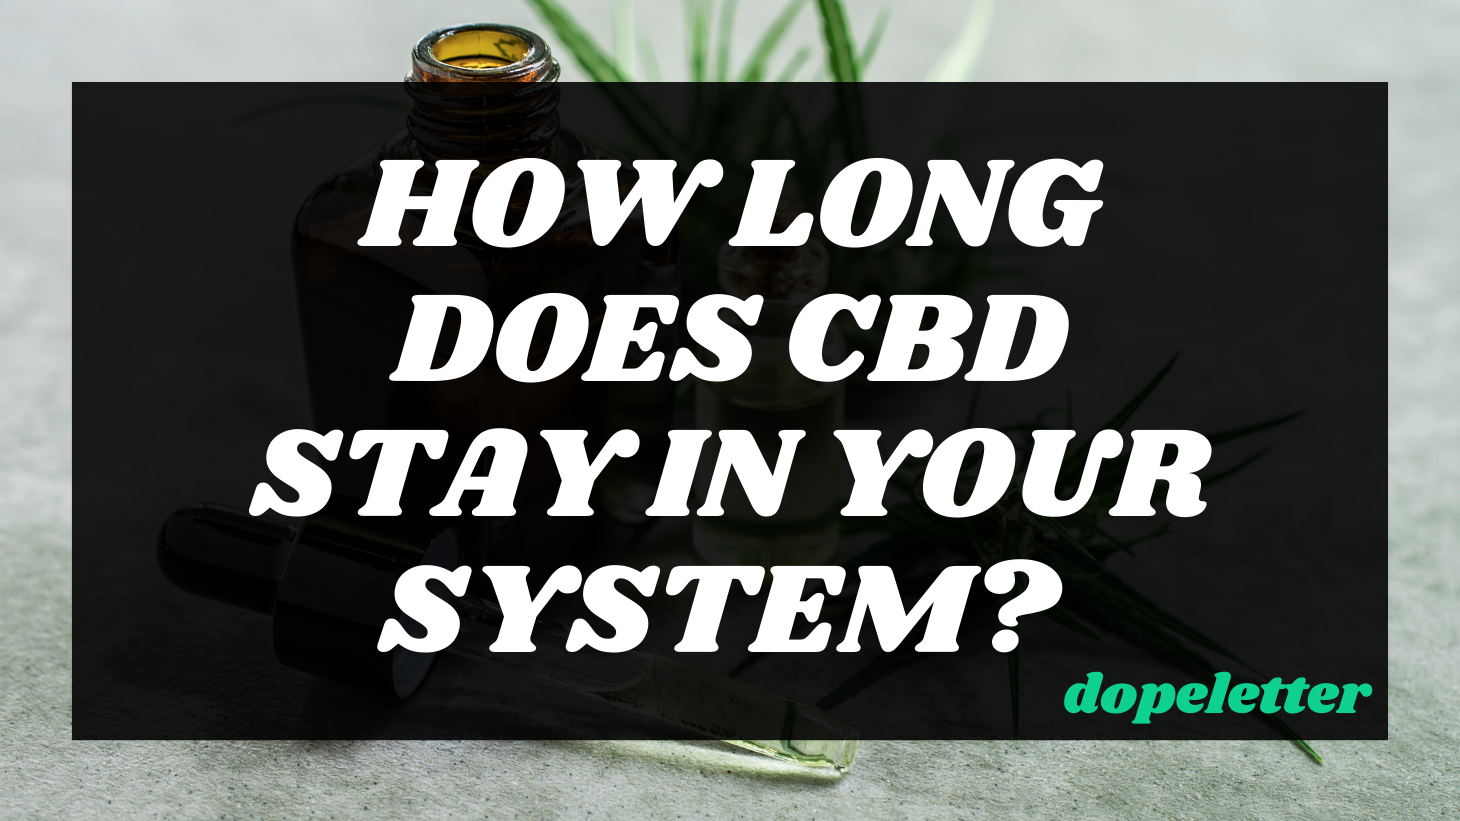 How Long Does CBD Last in your system